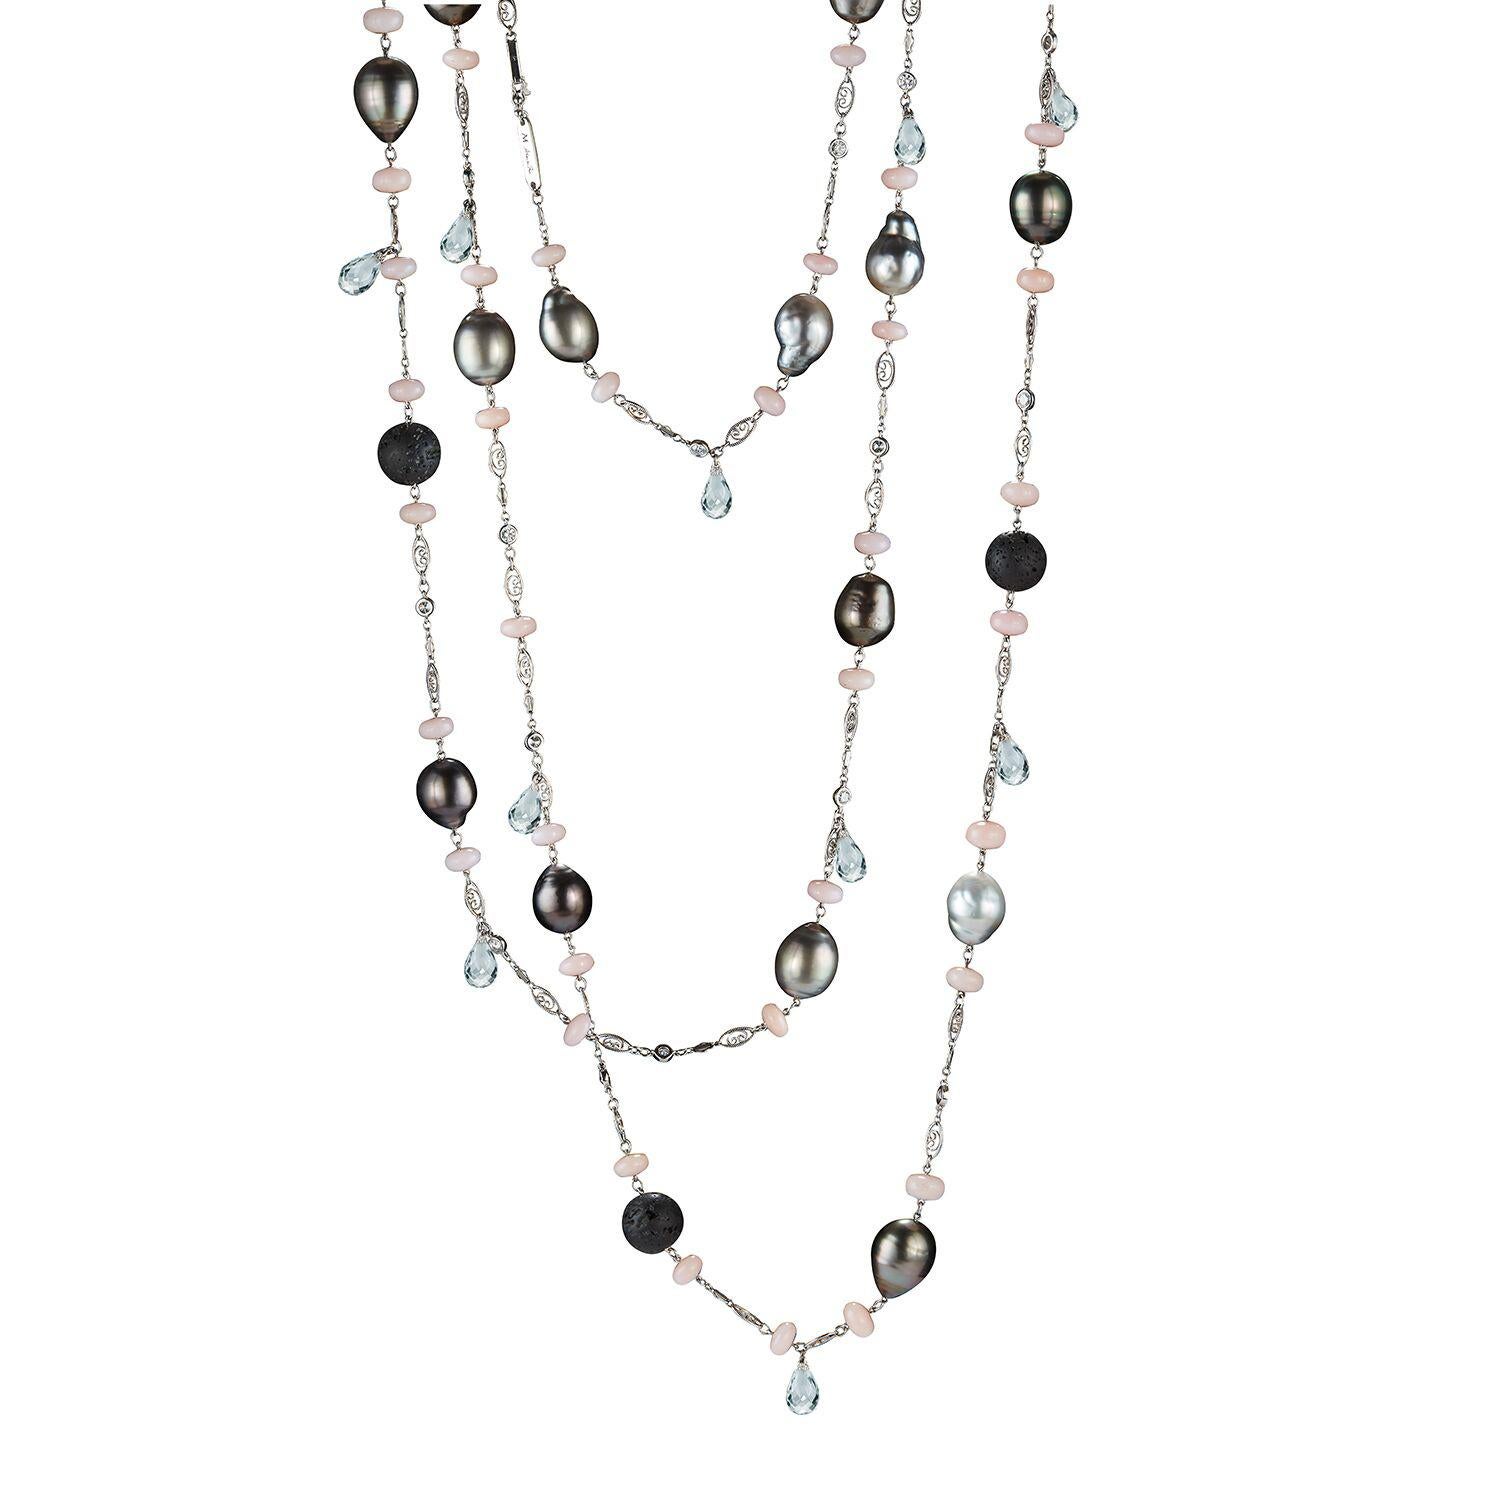 Alexandra Mor Pink Opal, Lava Beads and Pearl Sautoir Necklace im Angebot